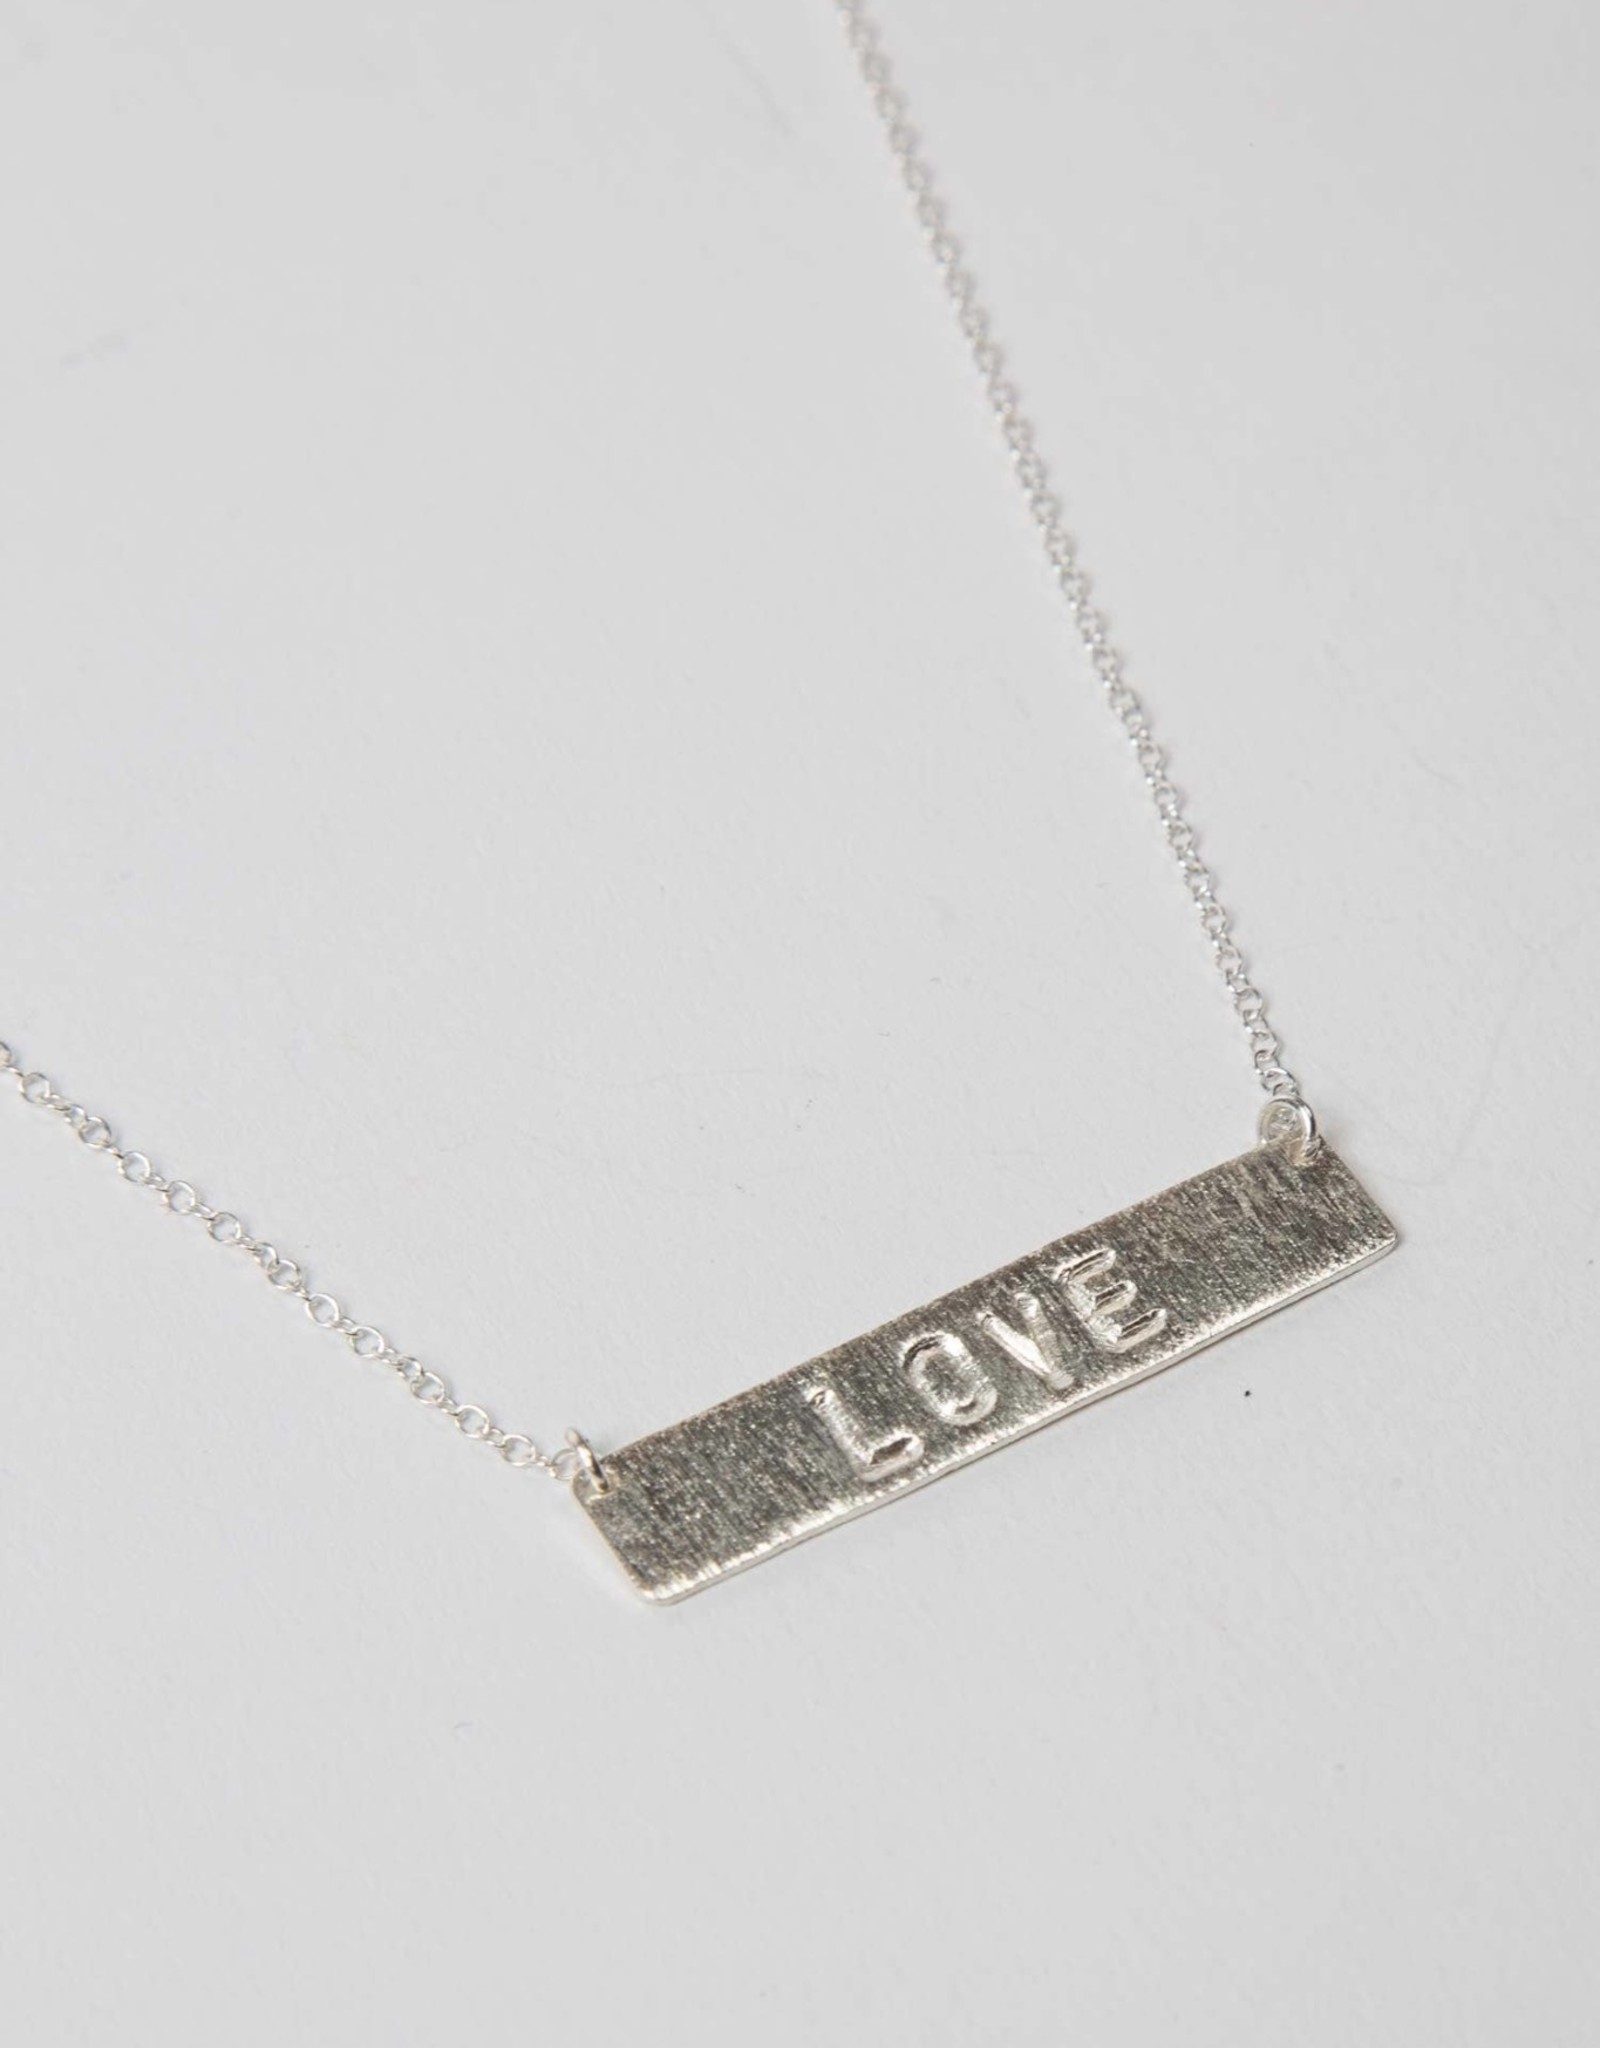 Indonesia Necklace Pure Love Silver Bar - Indonesia